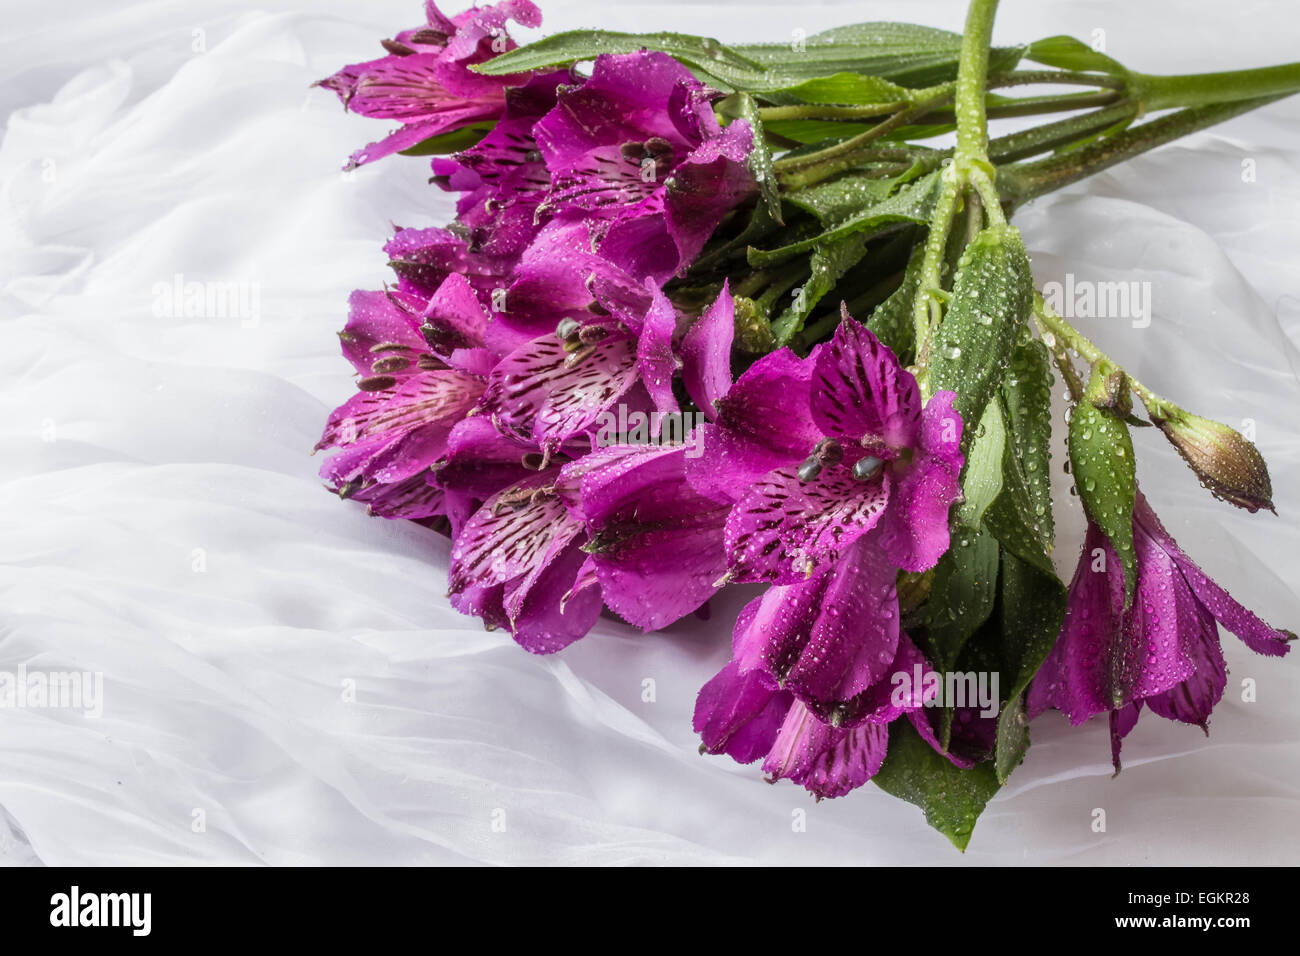 Spring flower - purple alstroemeria ( Peruvian lily or lily of the Incas) - white background Stock Photo